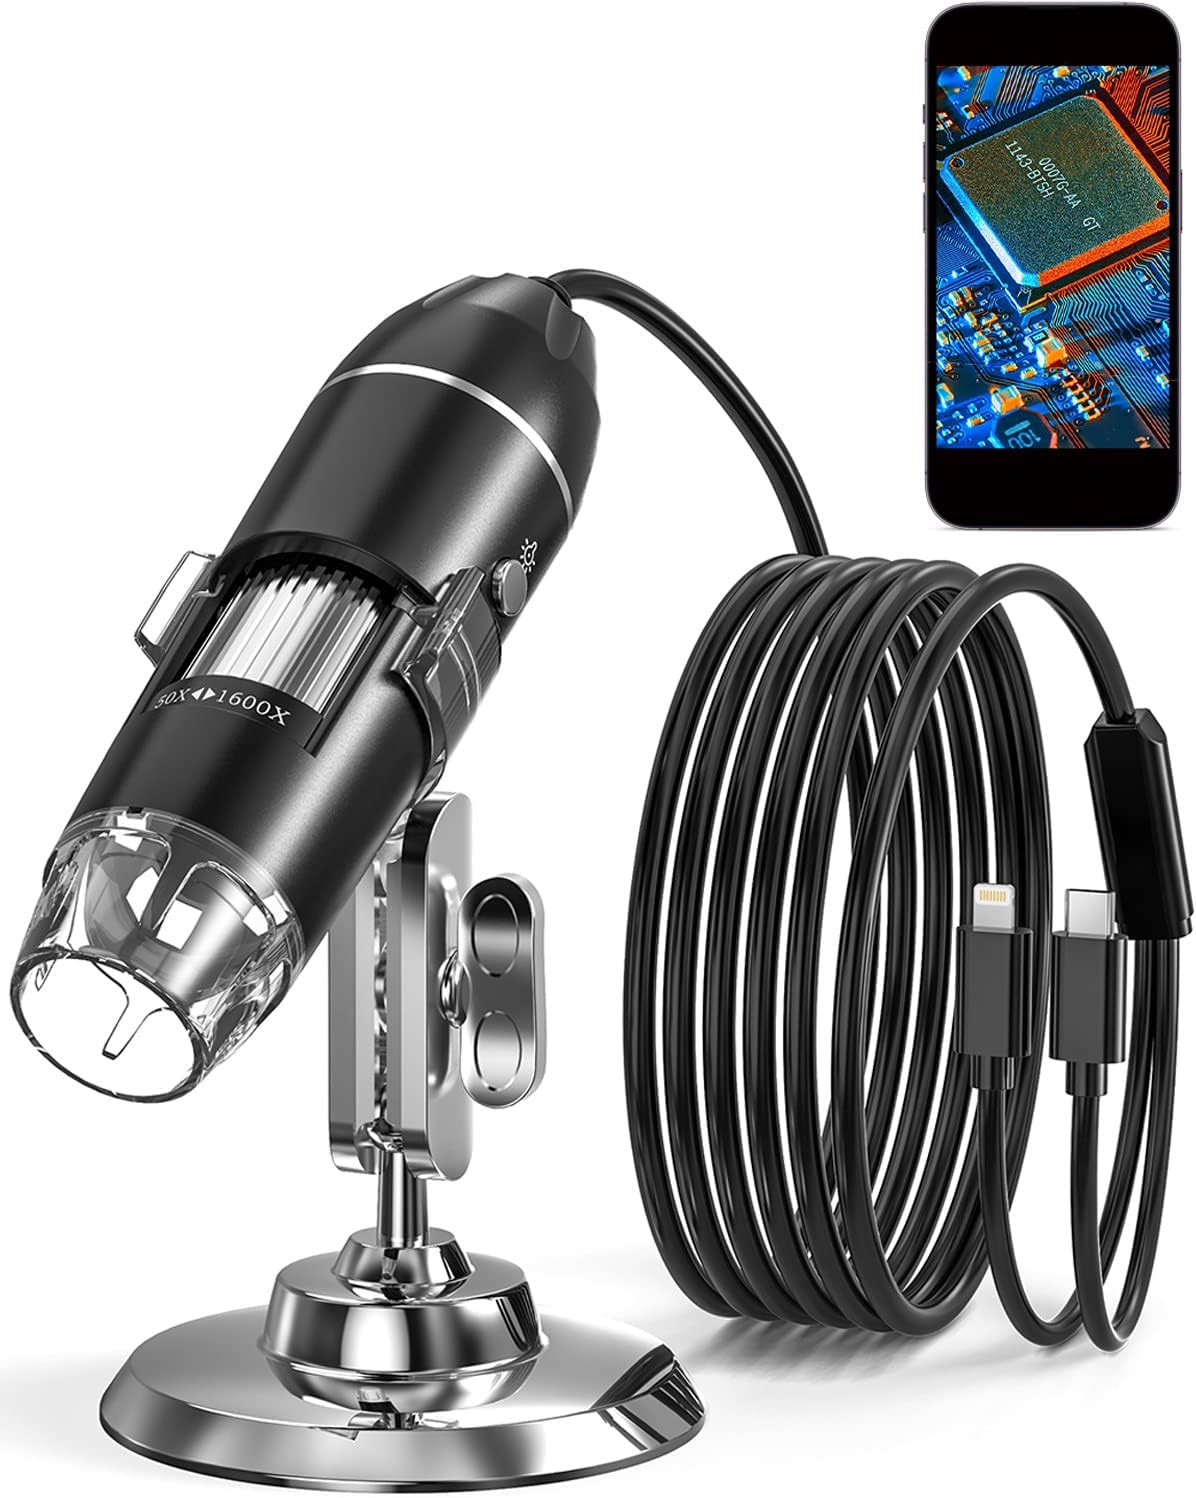 USB Digital Microscope, SKYEAR 50X-1600X Magnification Handheld Digital Microscope Compatible with iOS & Android Devices, Adjustable Stand, 8 LED Lights, Portable Microscope Camera for Adults, Kids